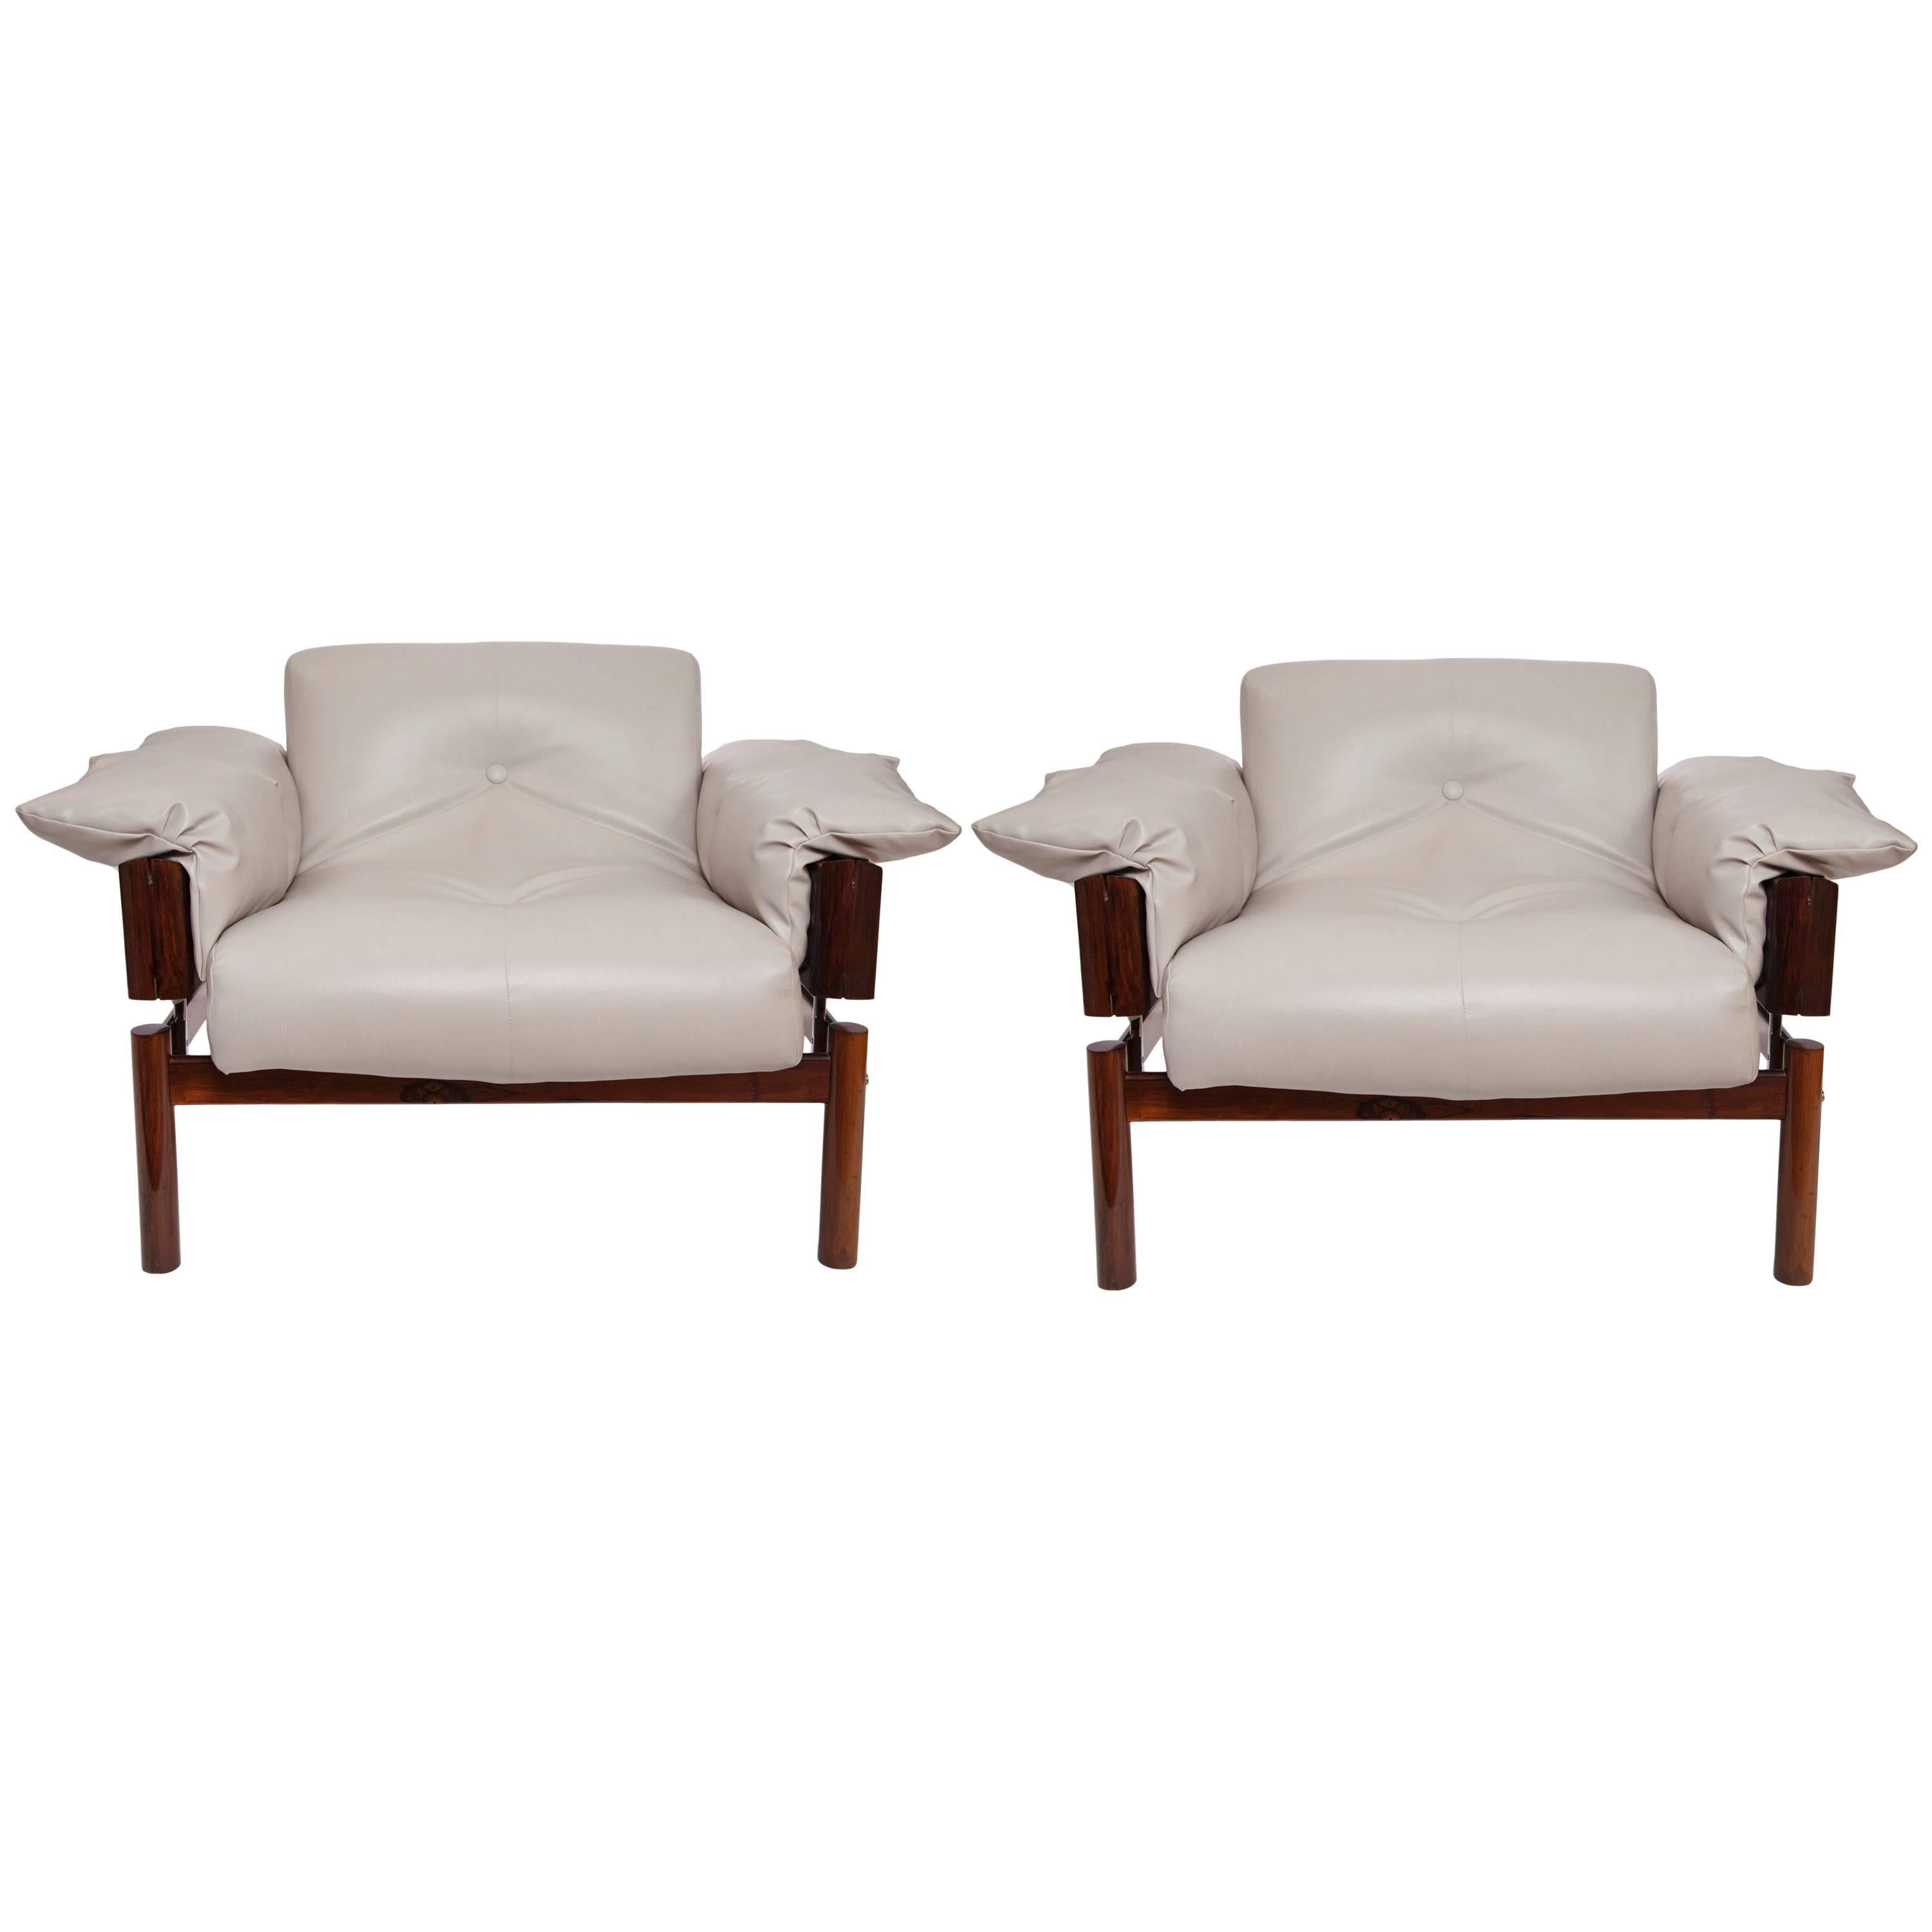 A pair of lounge armchairs by Brazilian designer Percival Lafer, produced circa 1960s, each with cushioned button-tufted back, arms and seat, upholstered in dove grey faux leather, against a linear jacaranda frame, accented with chrome. Very good